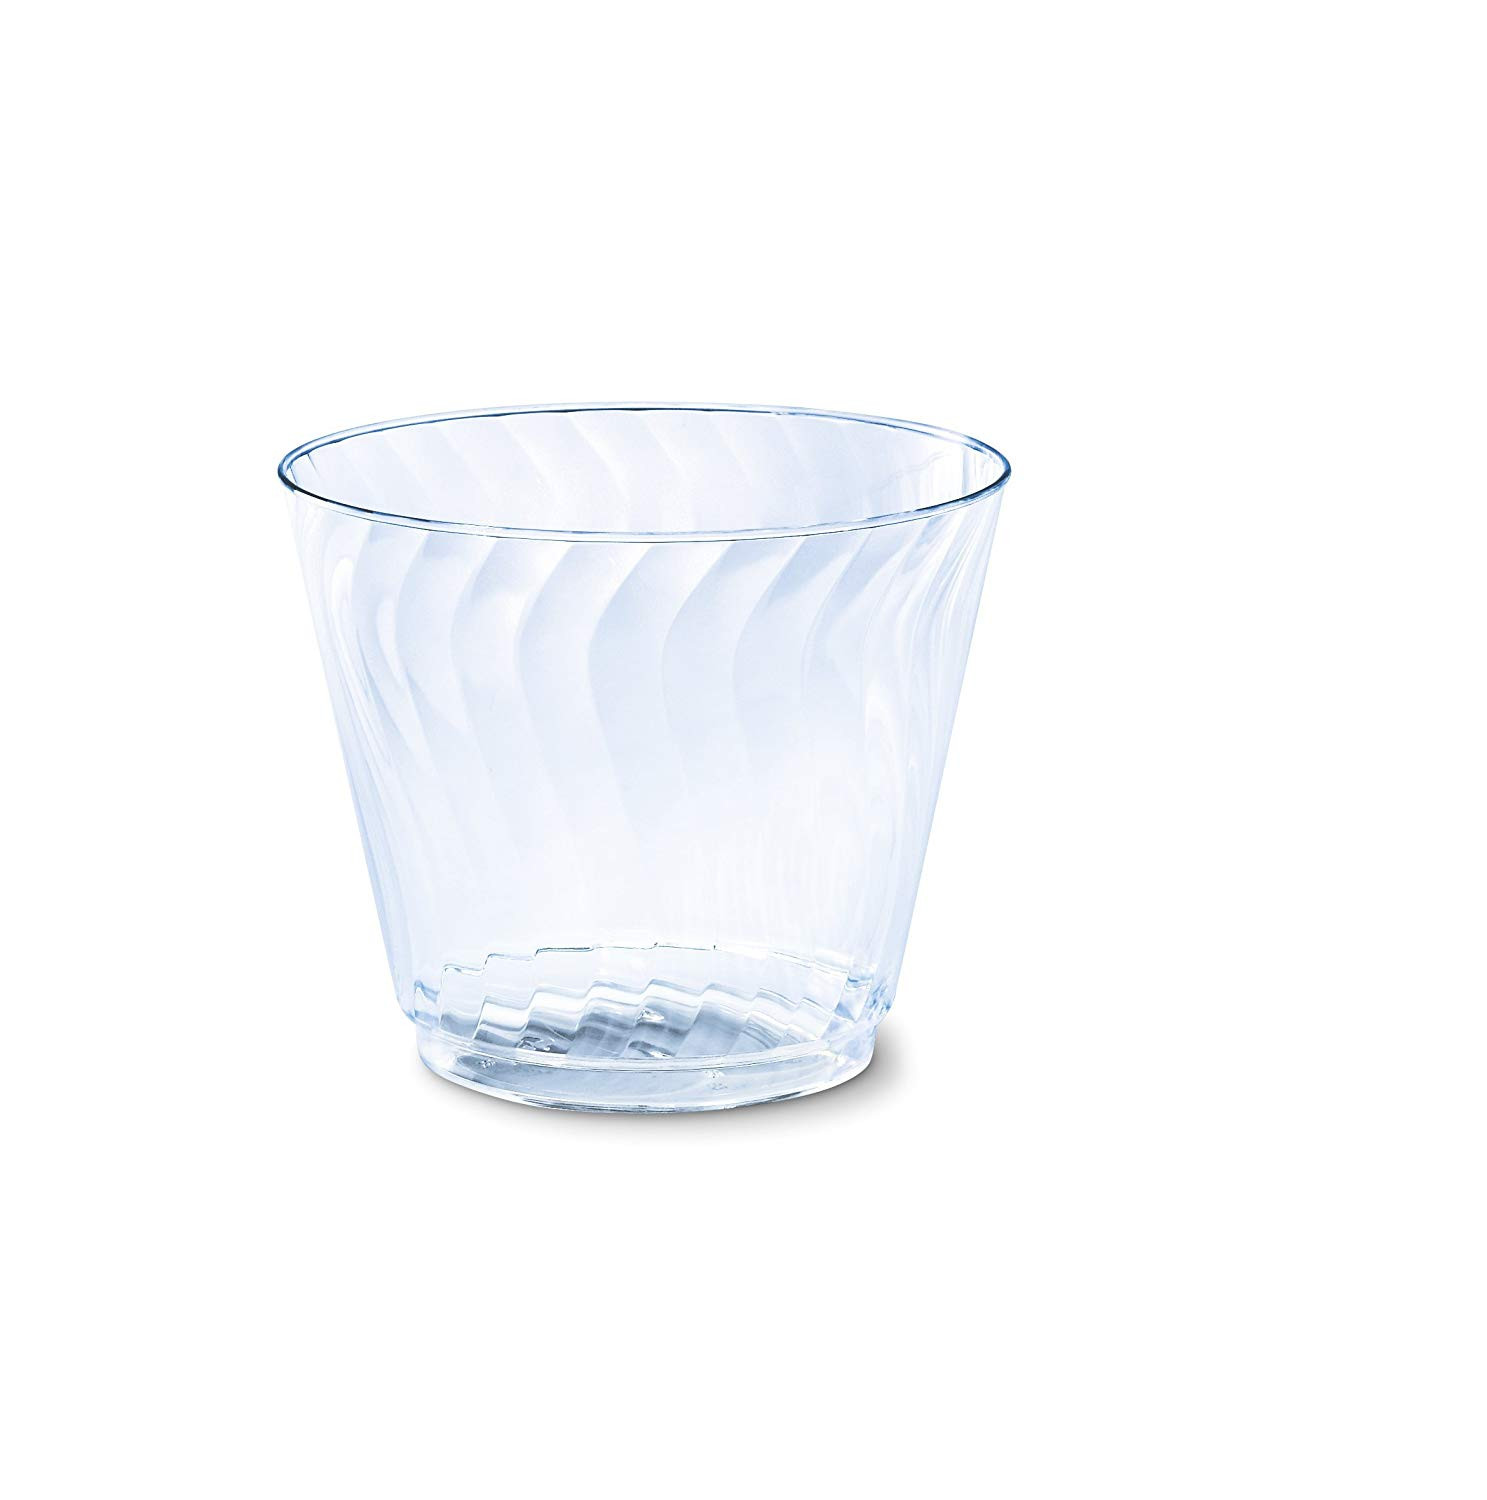 24 attractive Mercer Large Recycled Glass Vase 2023 free download mercer large recycled glass vase of amazon com chinet cut crystal tumblers 9 ounce 100 count health regarding amazon com chinet cut crystal tumblers 9 ounce 100 count health personal care